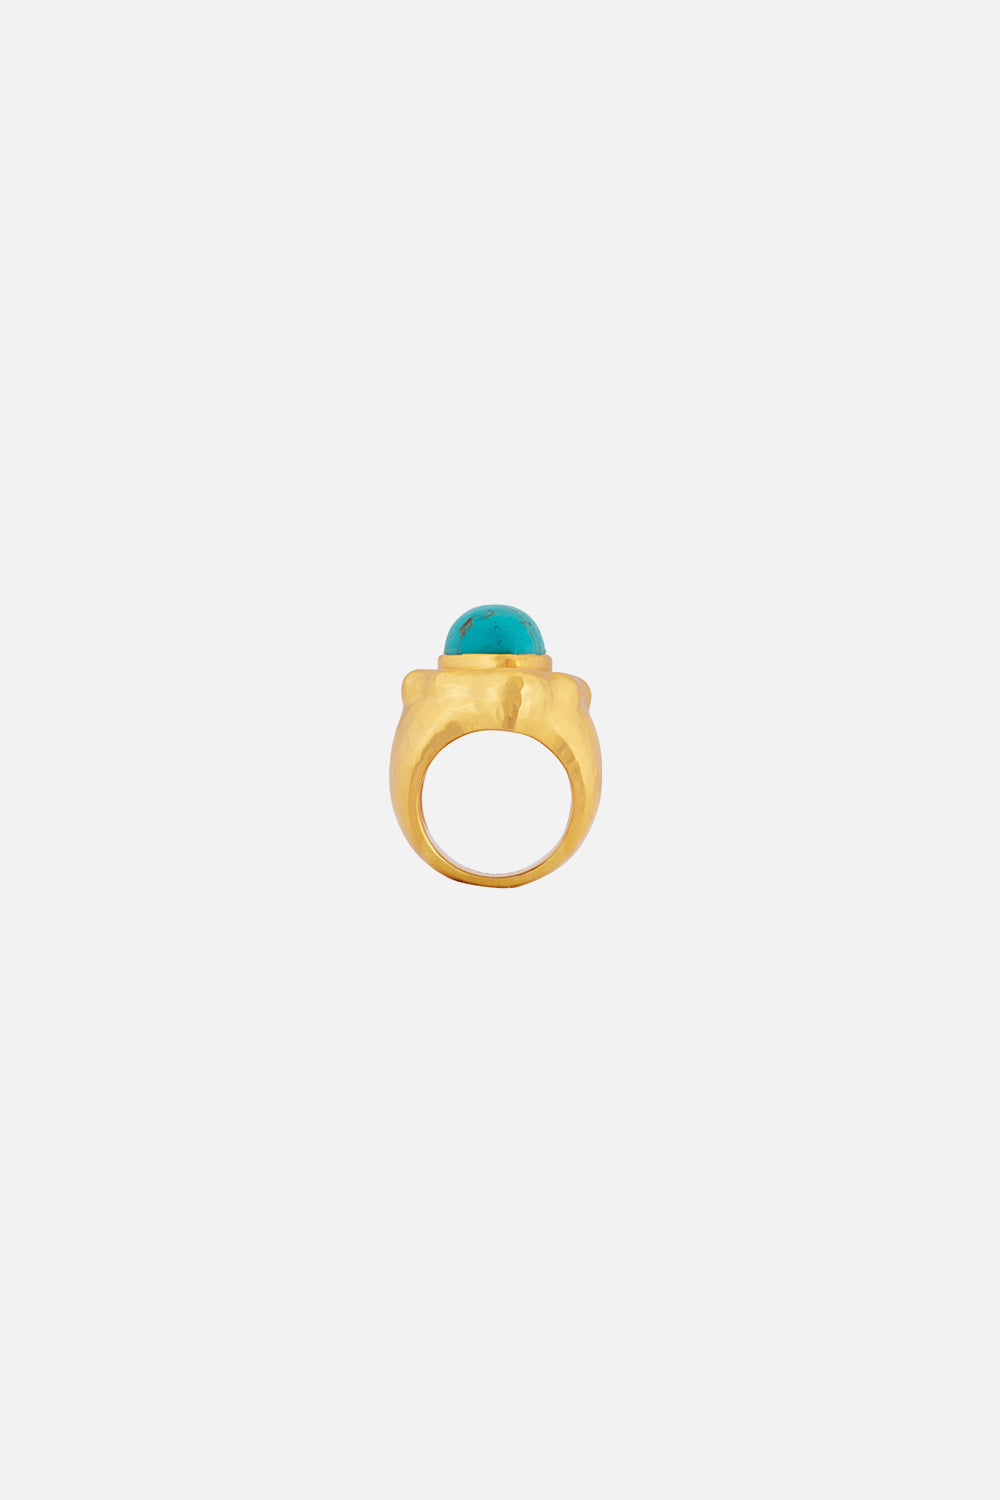 CAMILLA jewellery gold tuquoise ring 